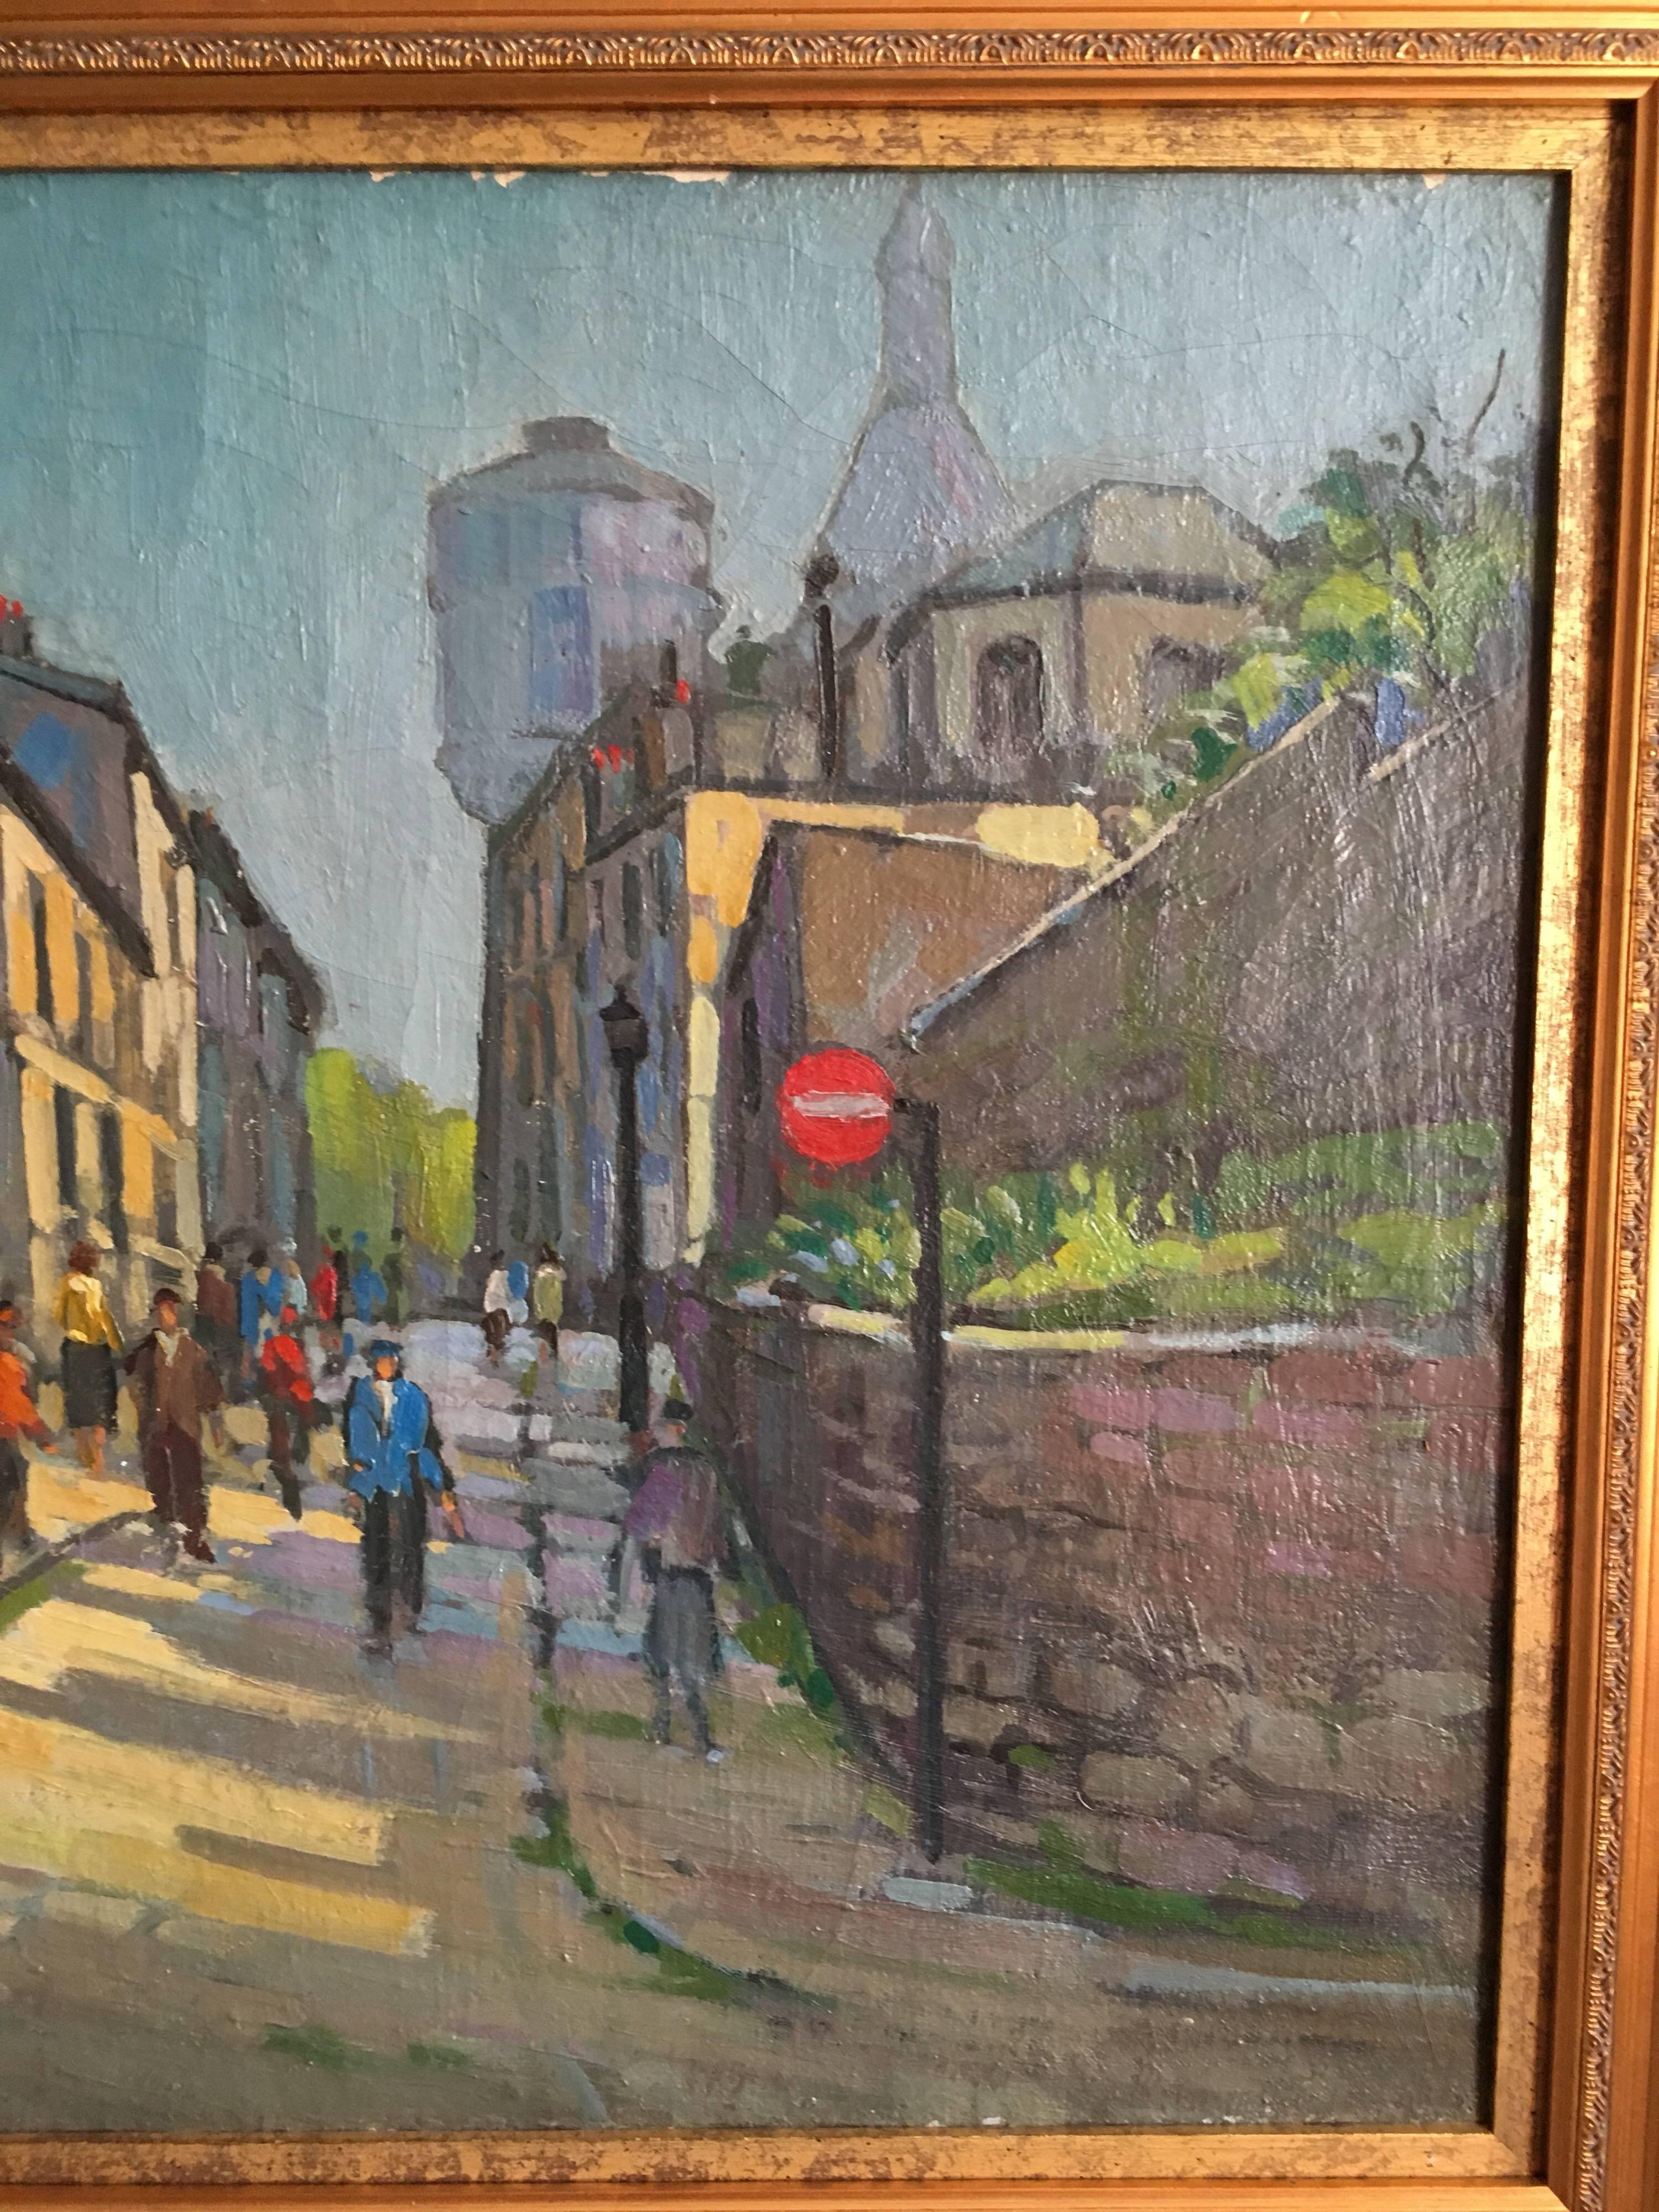 Montmartre Paris
French School, Mid 20th Century
Oil painting on canvas, framed
Framed size: 29 x 33 inches

Wonderful scene of figures enjoying wandering around Montmartre, Paris.  

The colours are lovely and bright, showing a brilliant use of